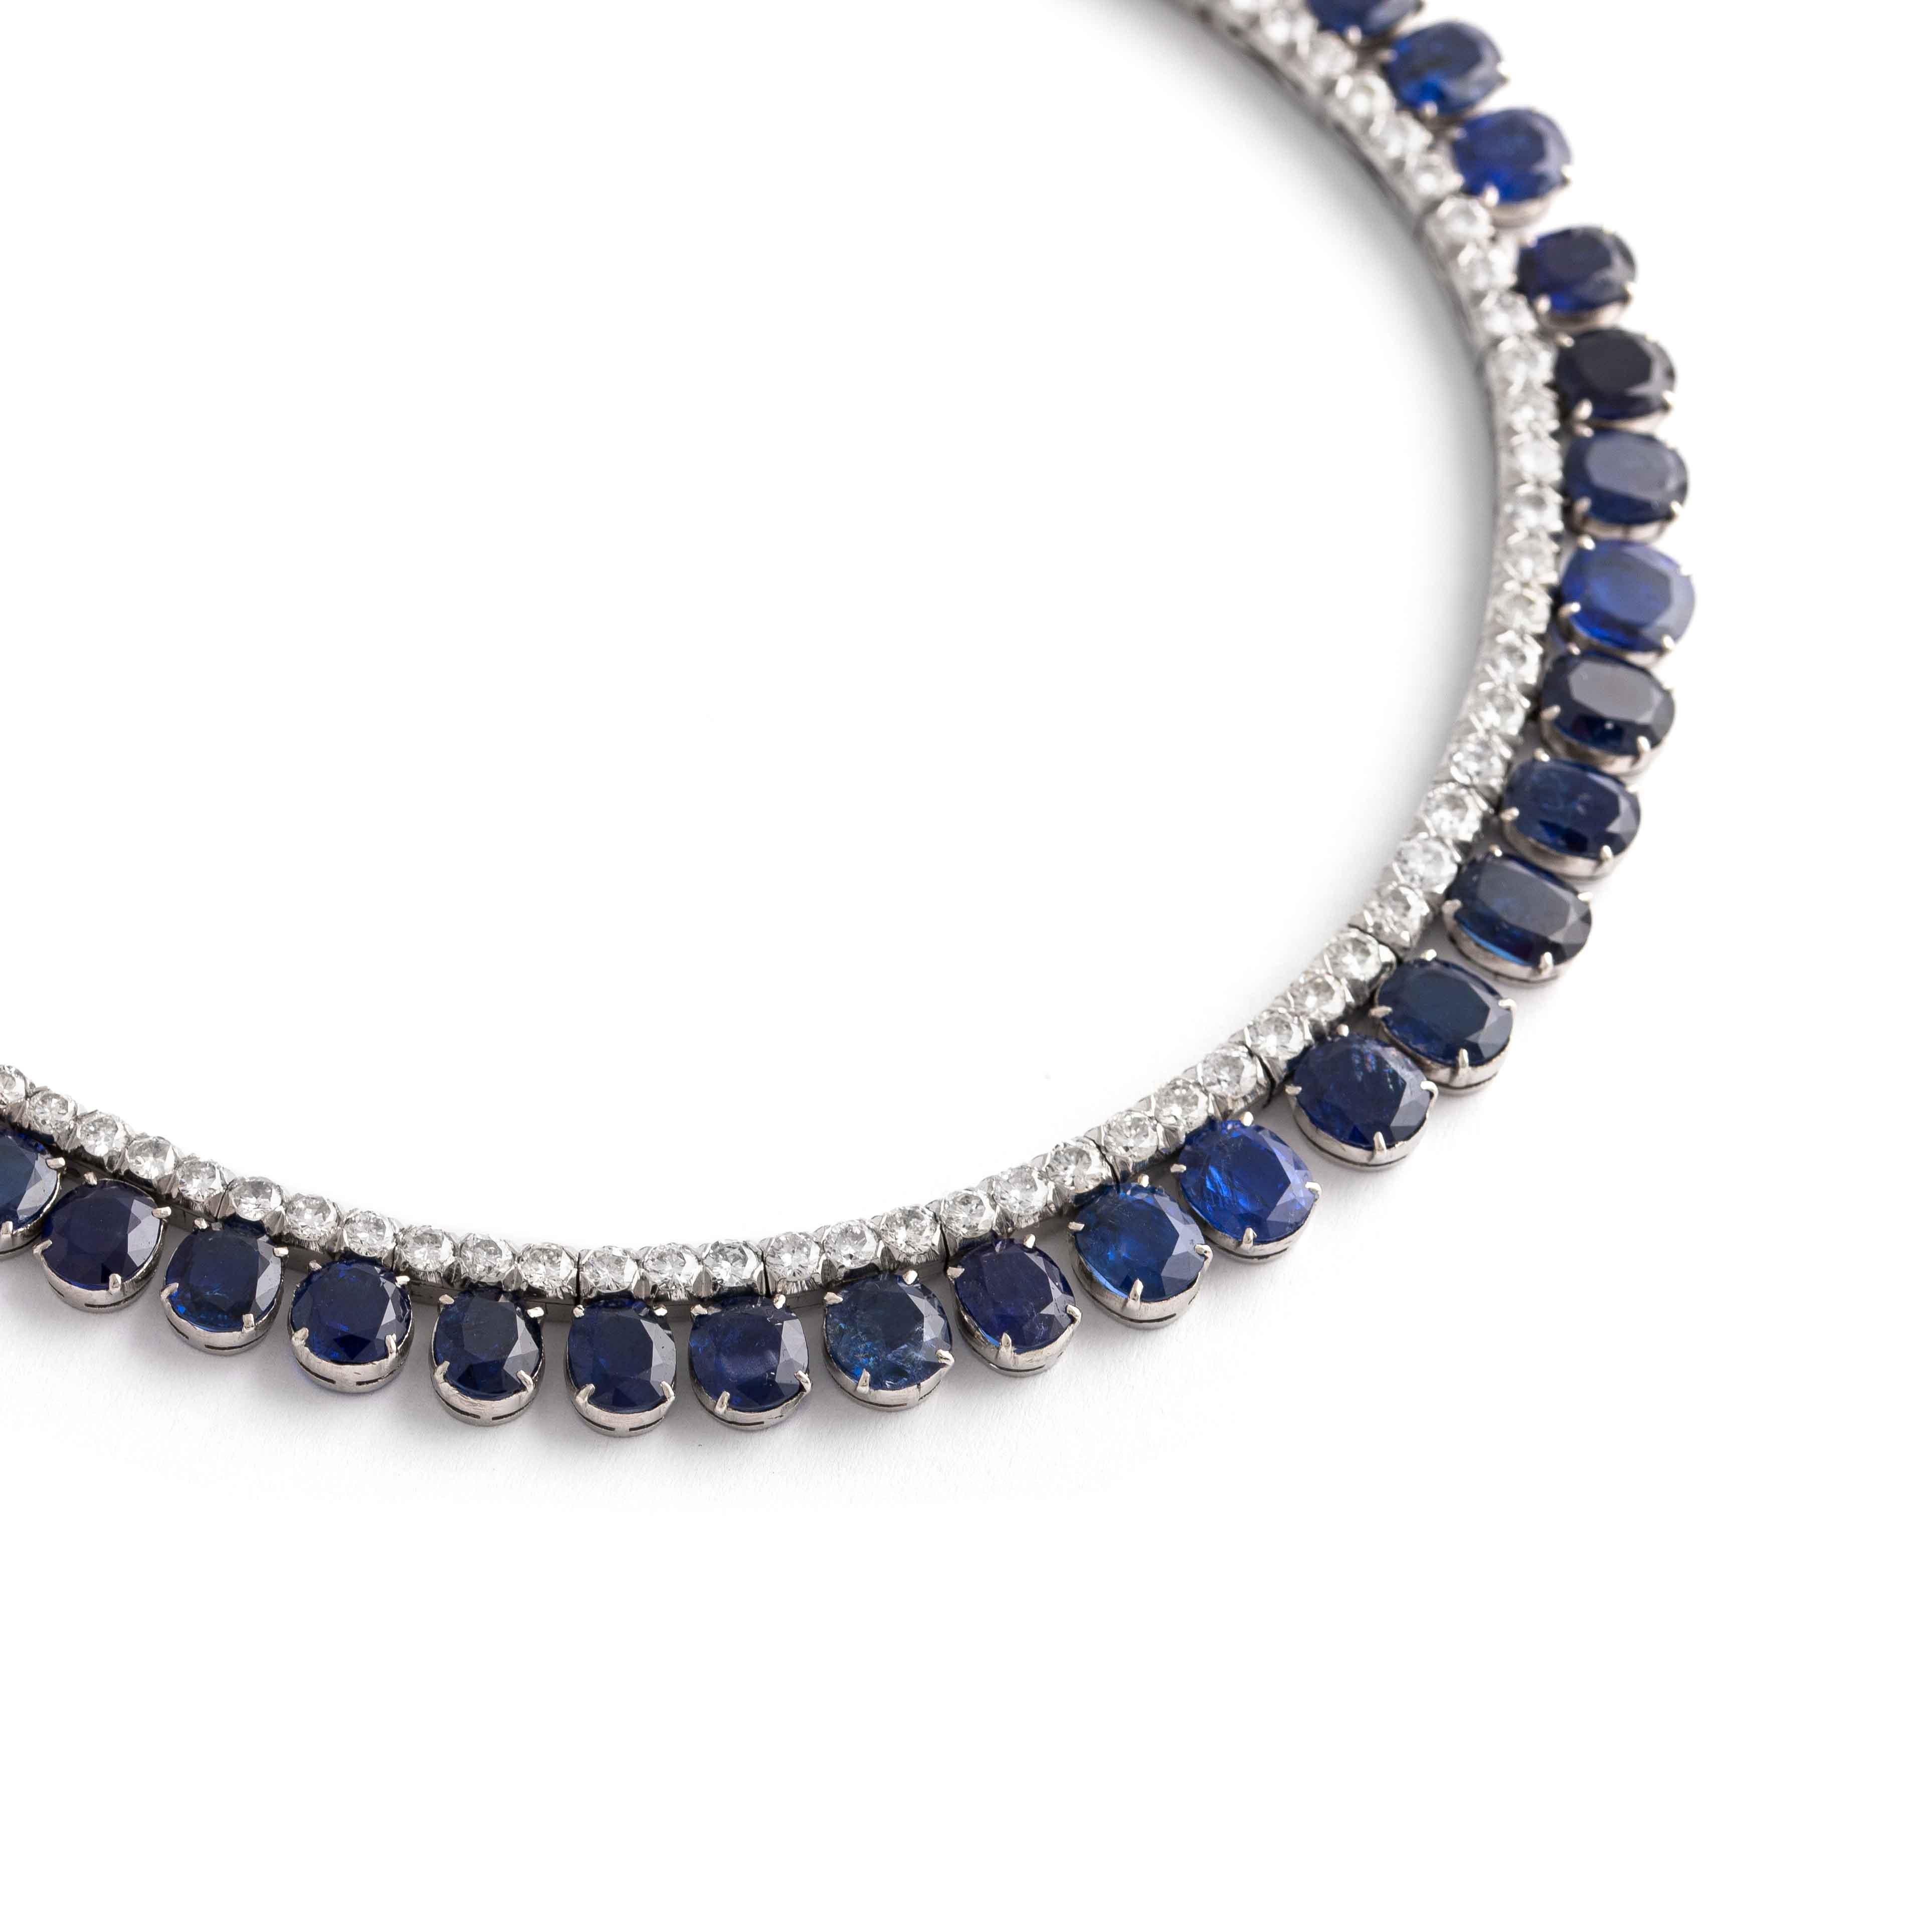 Natural Sapphire Burmese No heat and Diamond on white gold Necklace.
Total Sapphire weight: estimated to be 41.10 carats.
Total Diamond weight: estimated to be 5.17 carats.

According to the Ssef Swiss Laboratory Report 122750, the 68 sapphires are